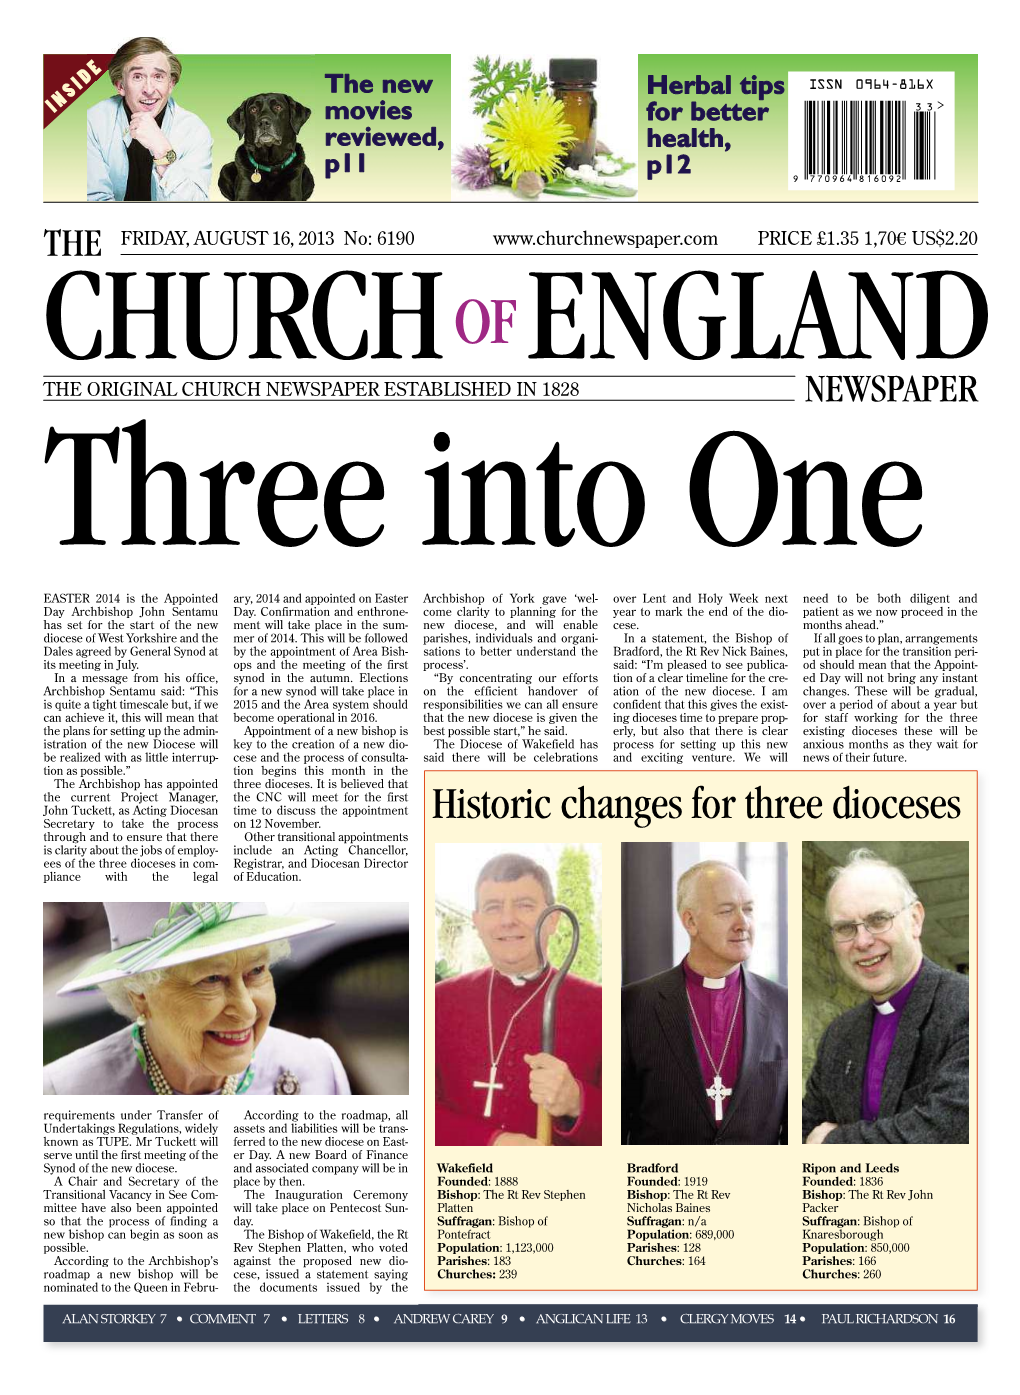 Historic Changes for Three Dioceses Secretary to Take the Process on 12 November